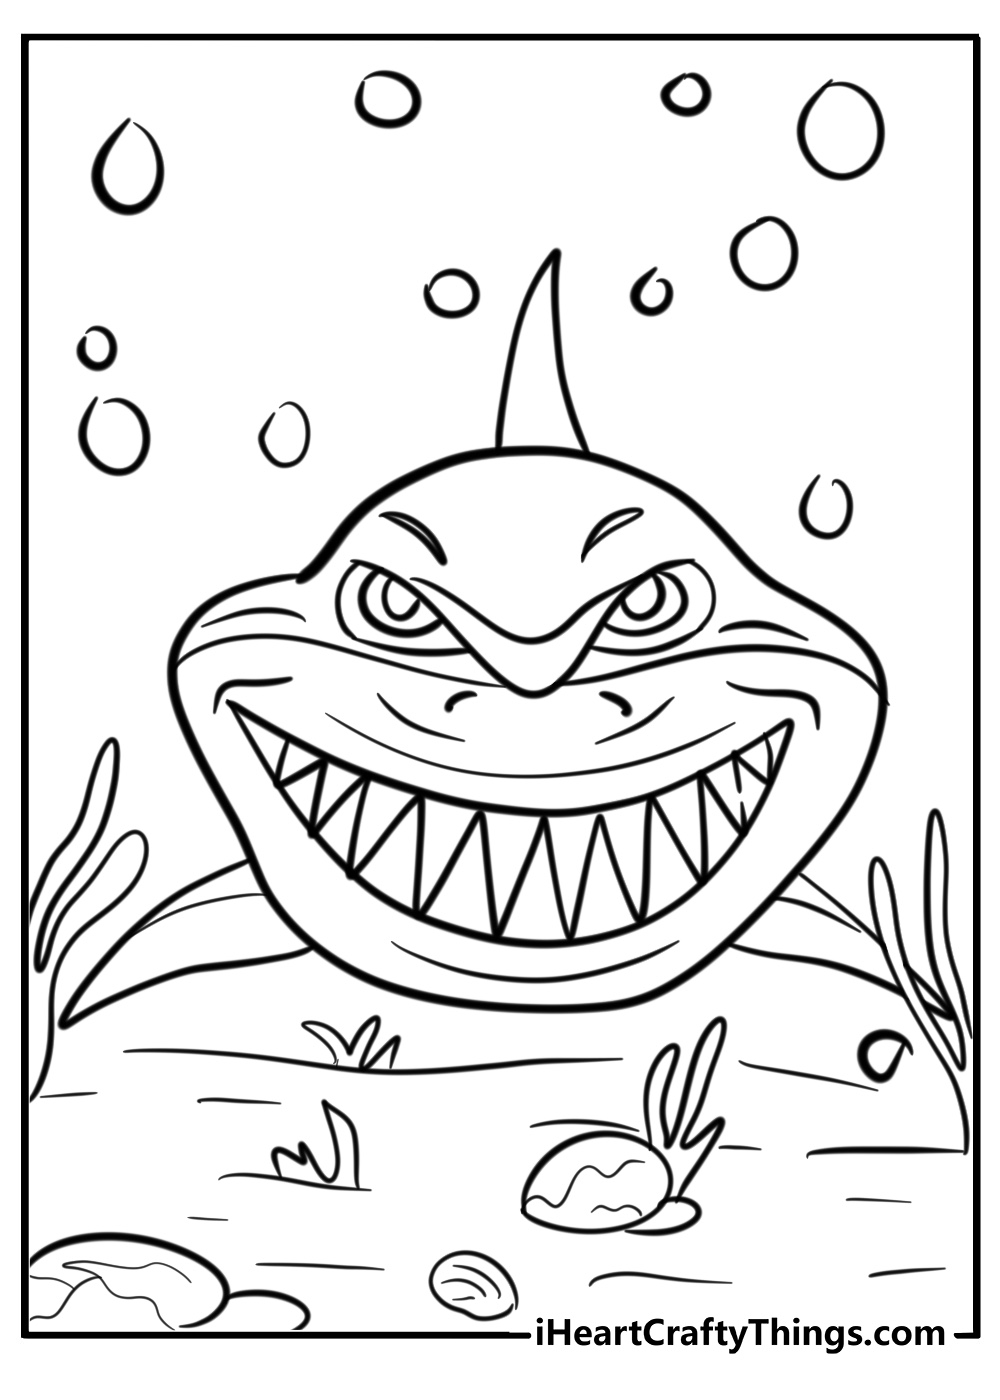 Scary cartoon shark coloring page showing teeth